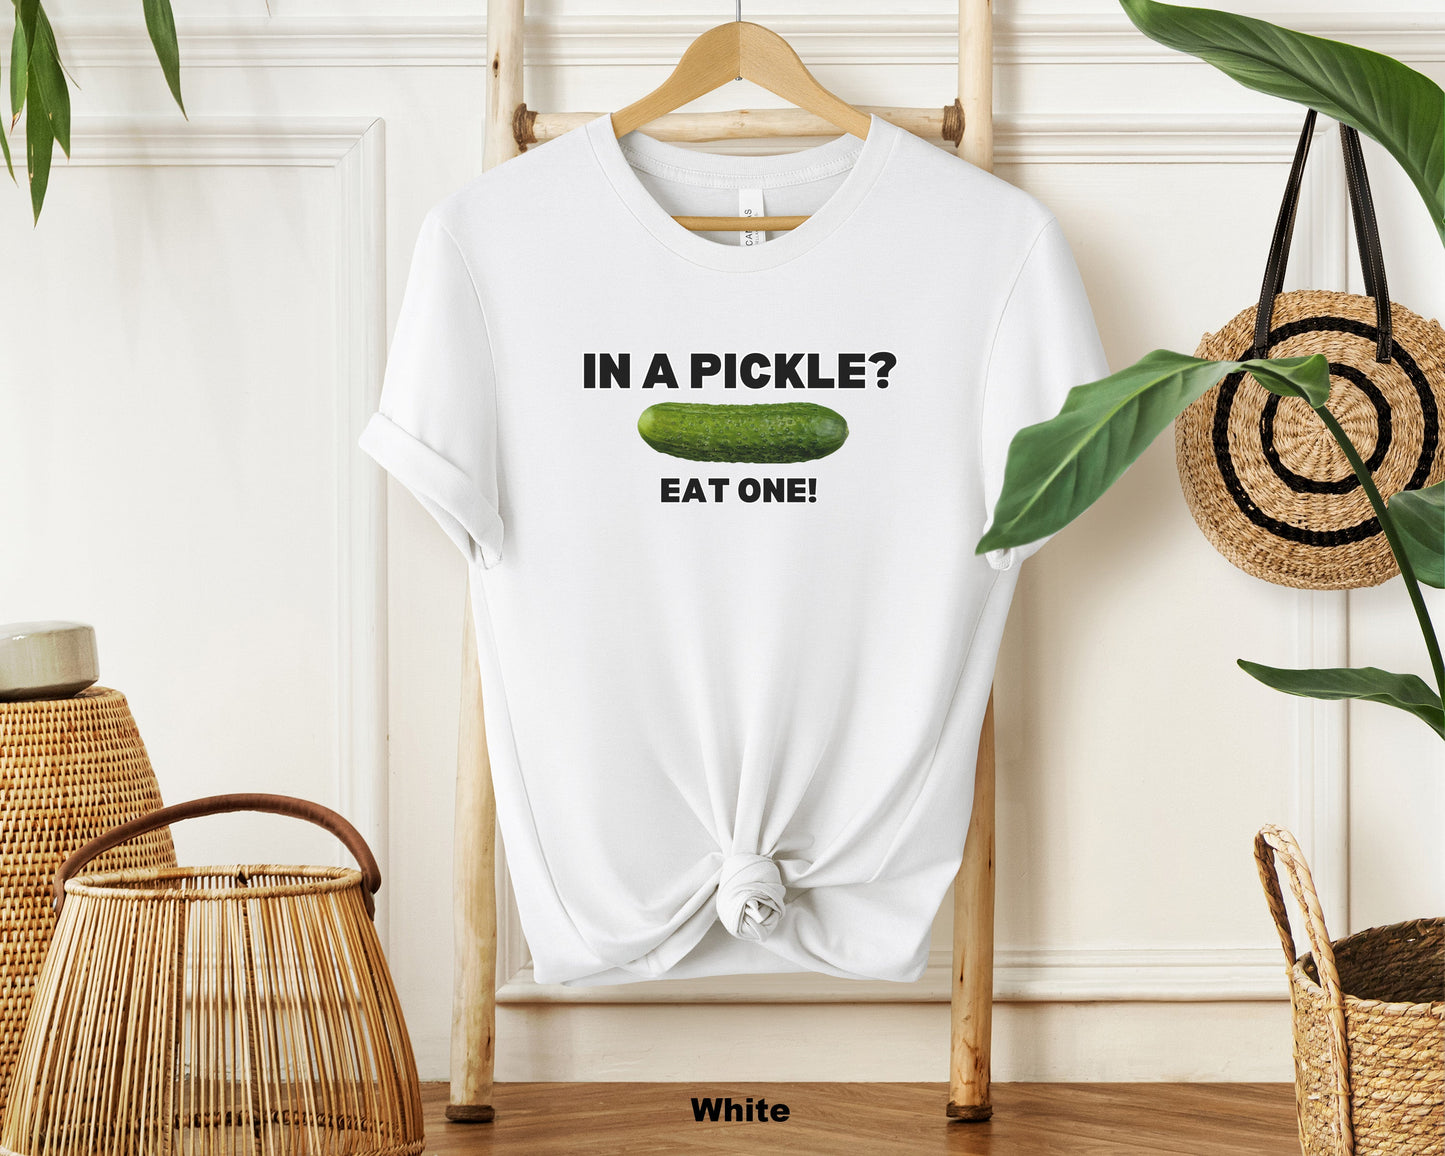 Pickle Parade Crewneck T-Shirt - Colorful Pickle Pattern Shirt for Food Lovers